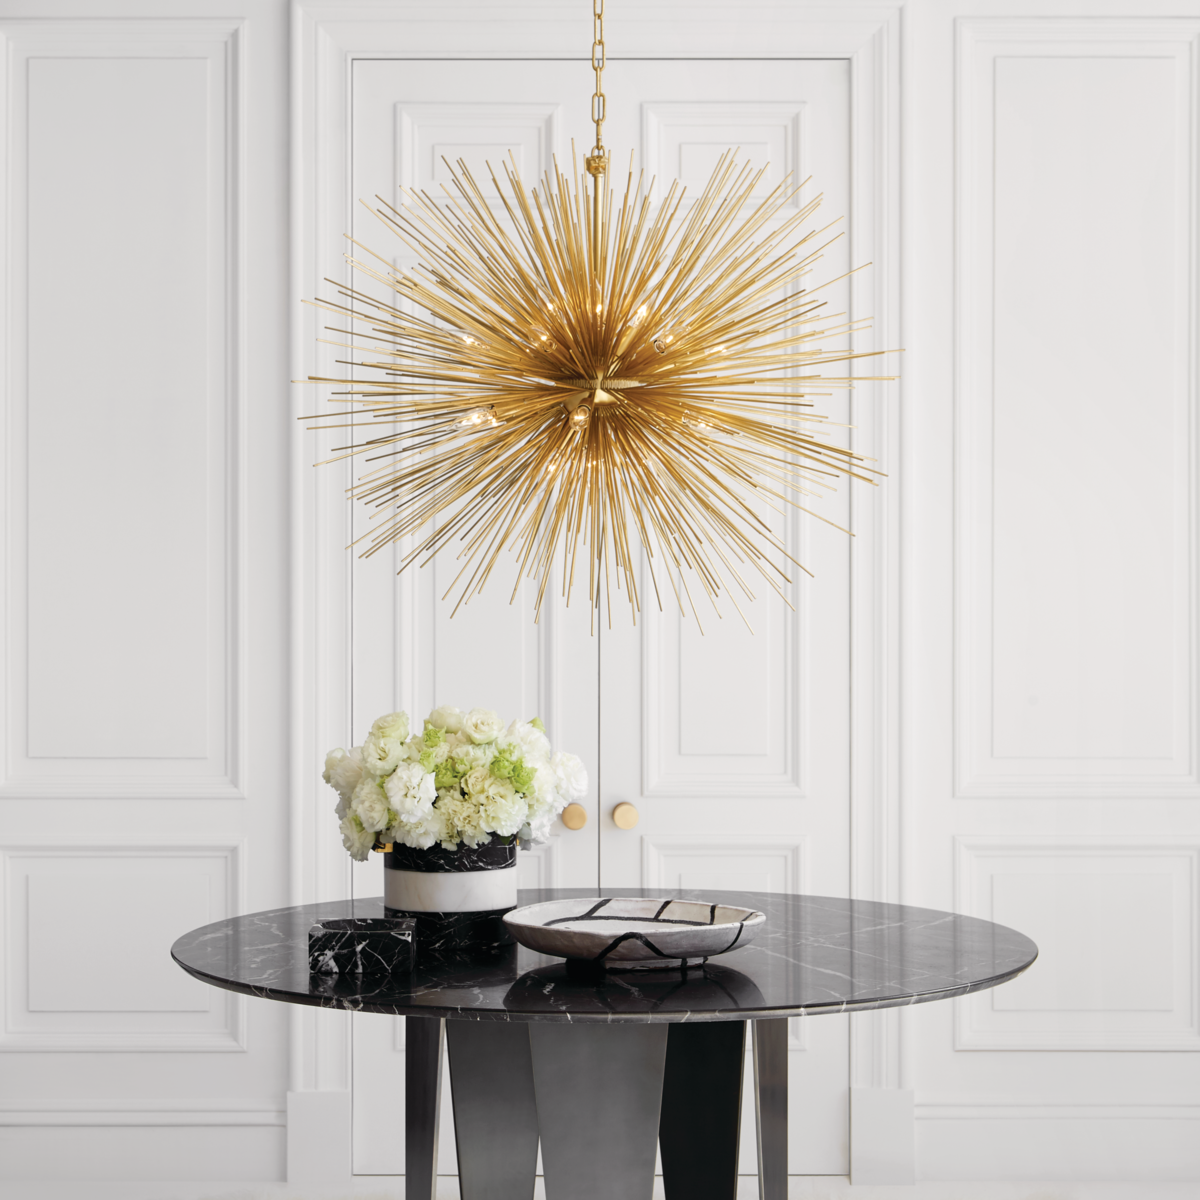 Golden pendant made of spikes over black marble roundtop table with flower centerpiece